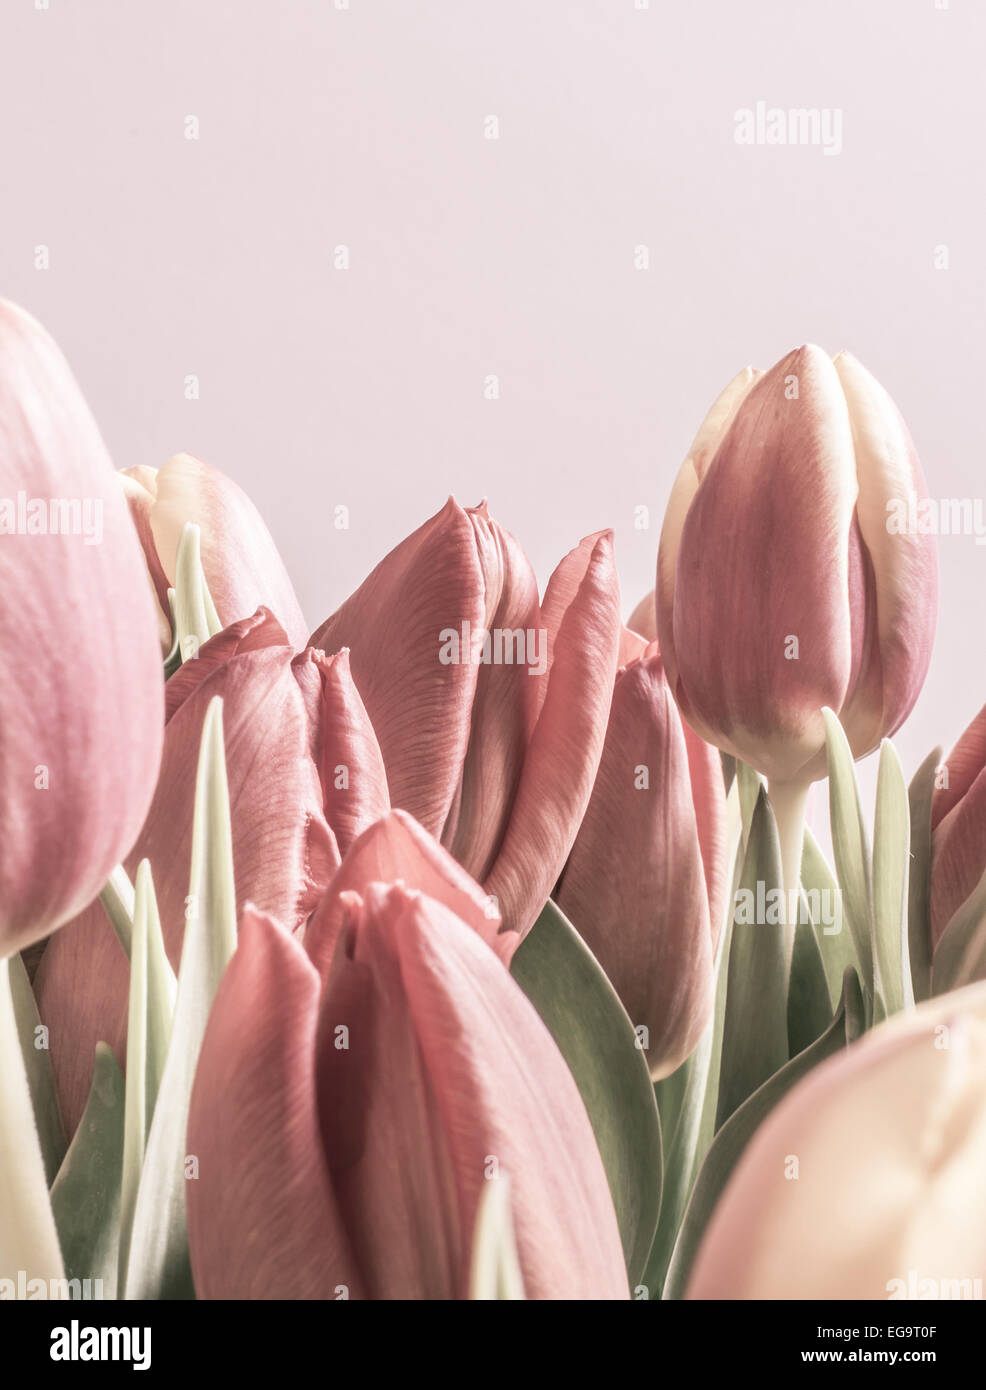 Vintage tulips in soft pink color. Vertical image with copy space. Stock Photo